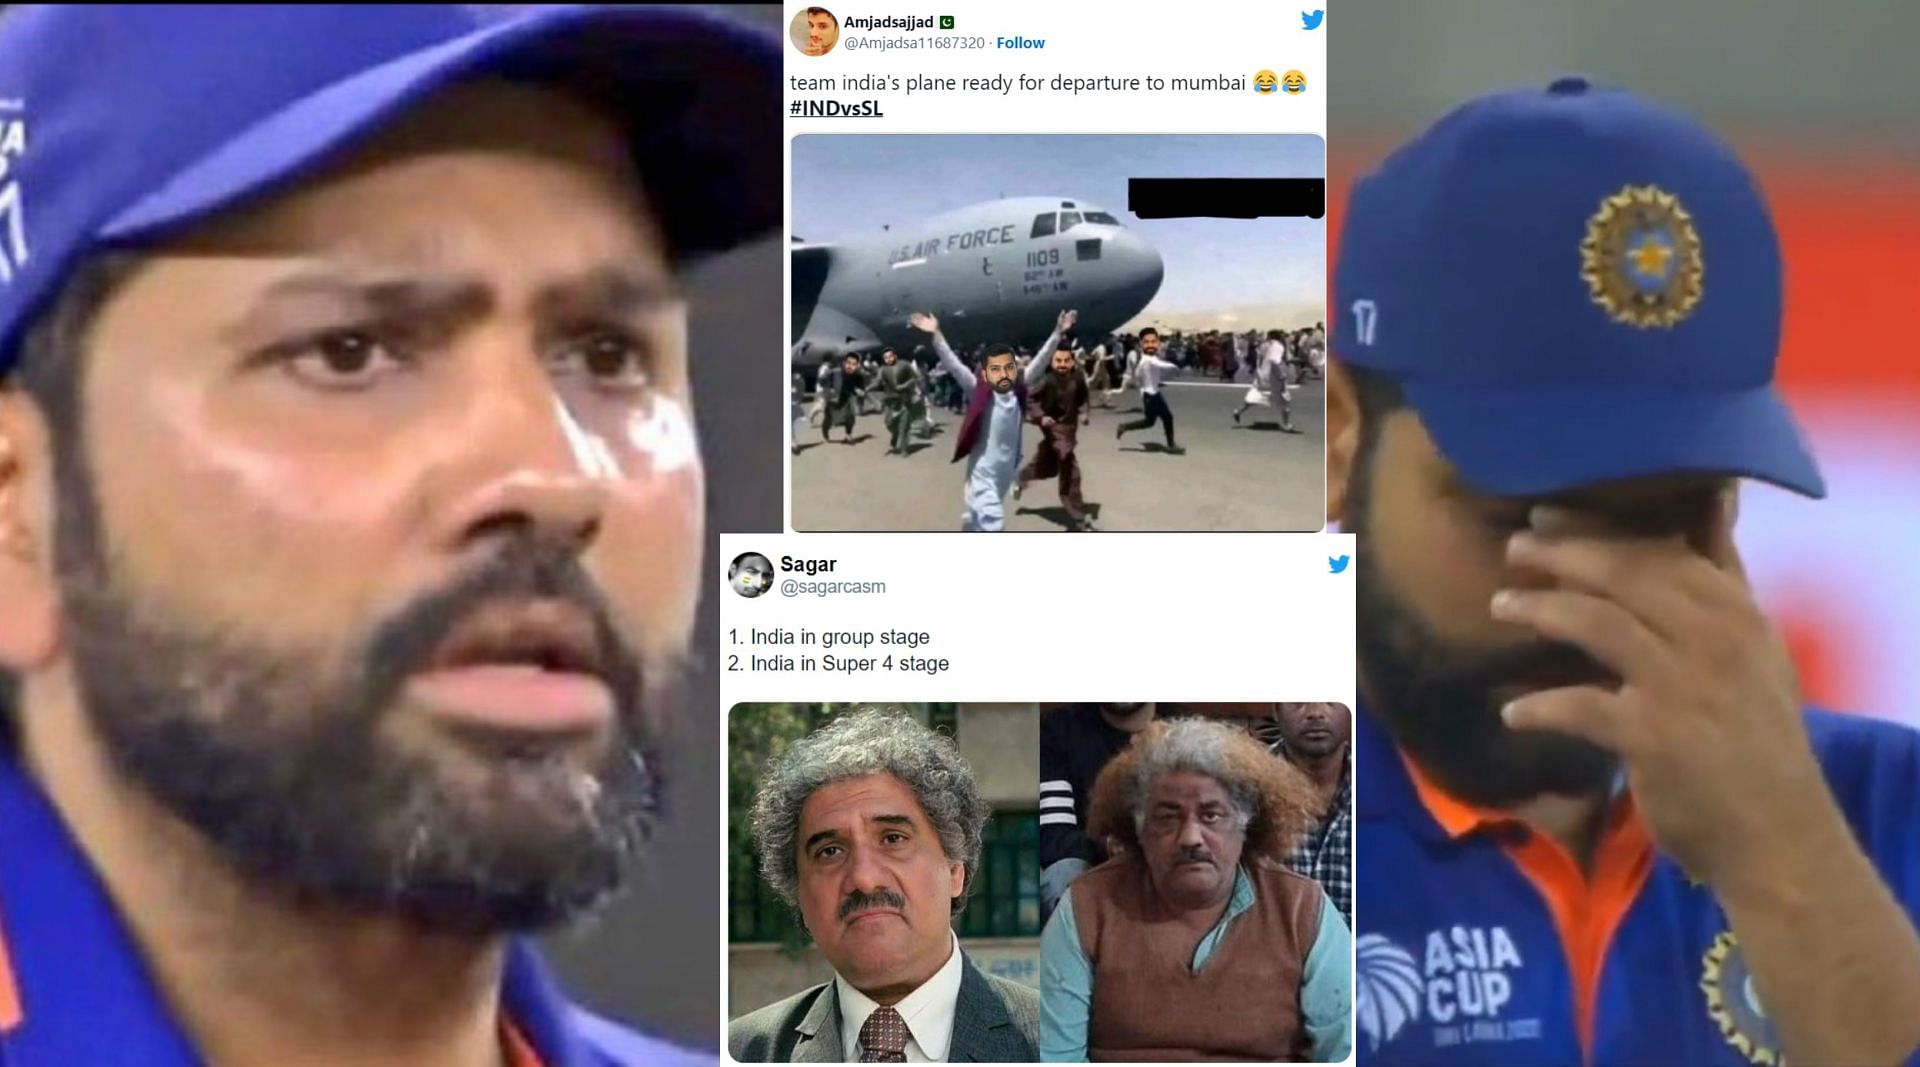 Fans took to social media to share memes after India lost against Sri Lanka on Tuesday in Asia Cup 2022